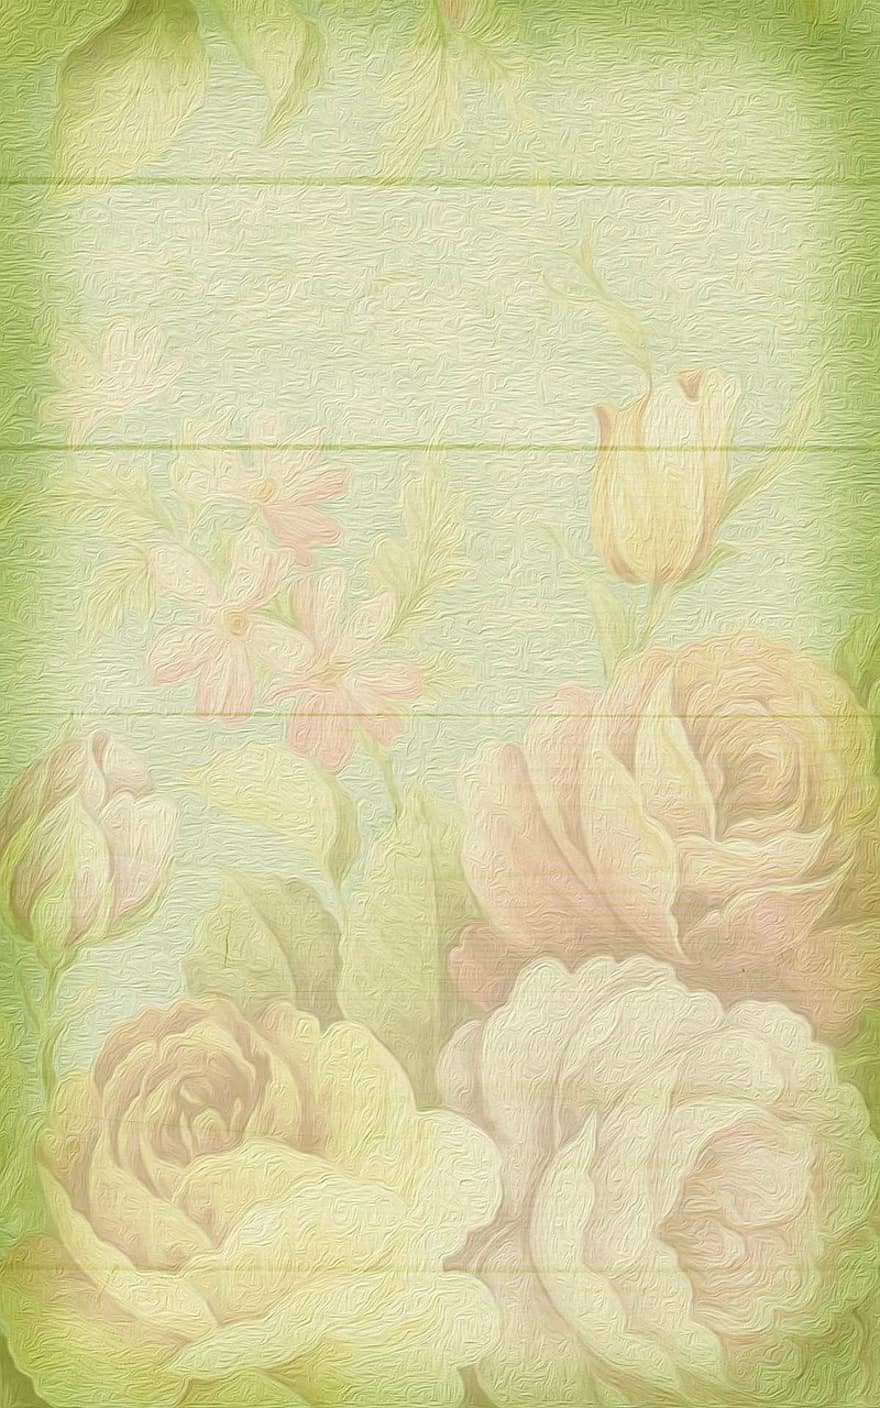 Soft, Pastel, Roses, Background, Romantic, Vintage, Pastellfarben, Hell, Spring, Antique, Photo Painting